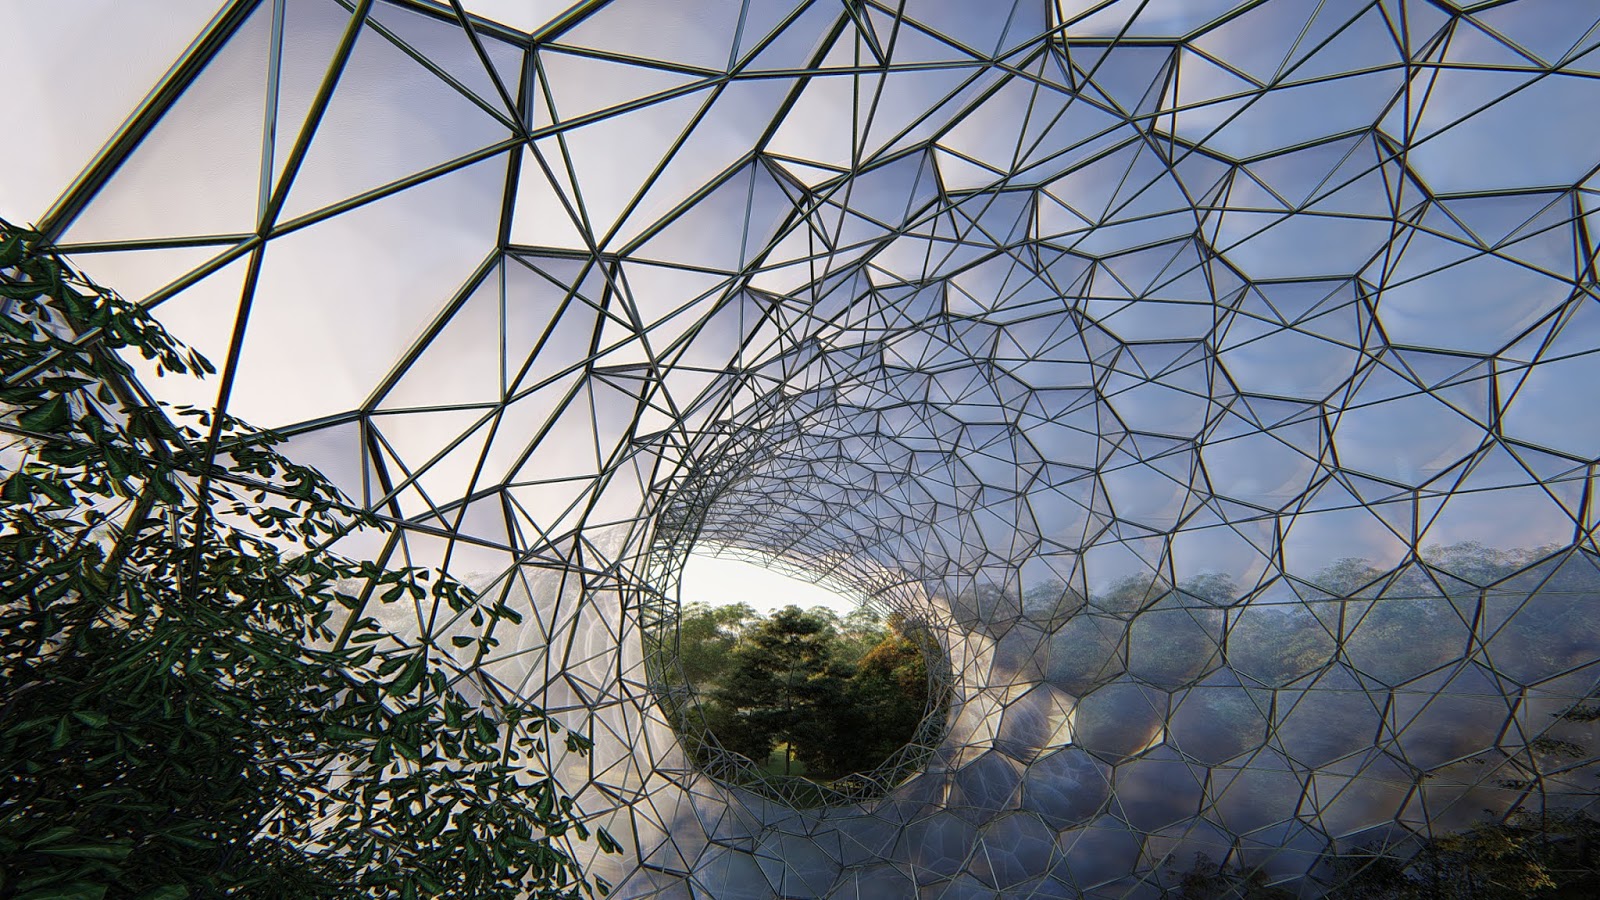 Parametric Design and Buildings – The 6 Ways Technology Will Change Architecture